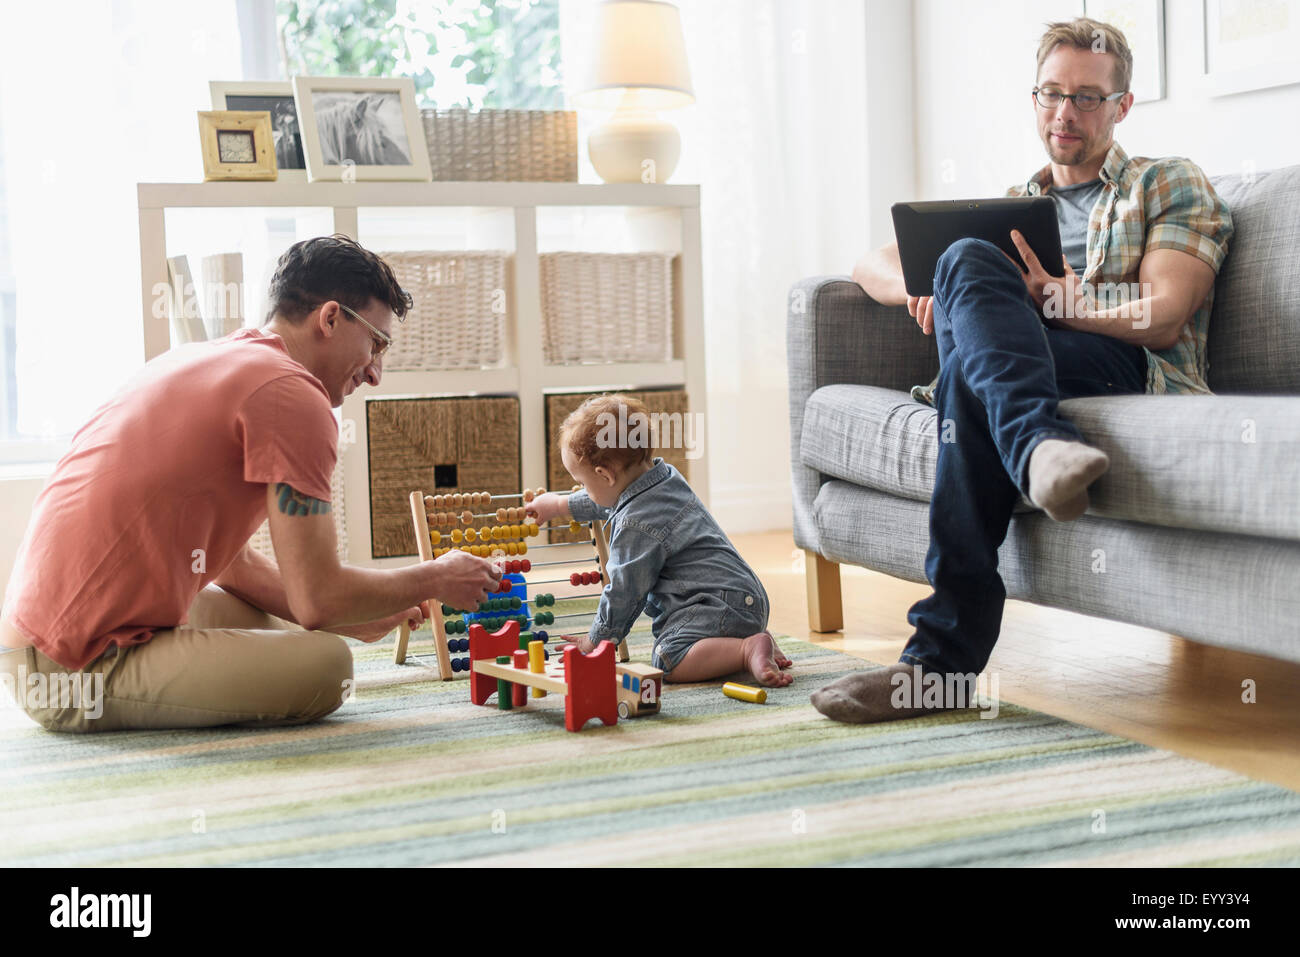 Caucasian gay fathers and baby relaxing in living room Stock Photo